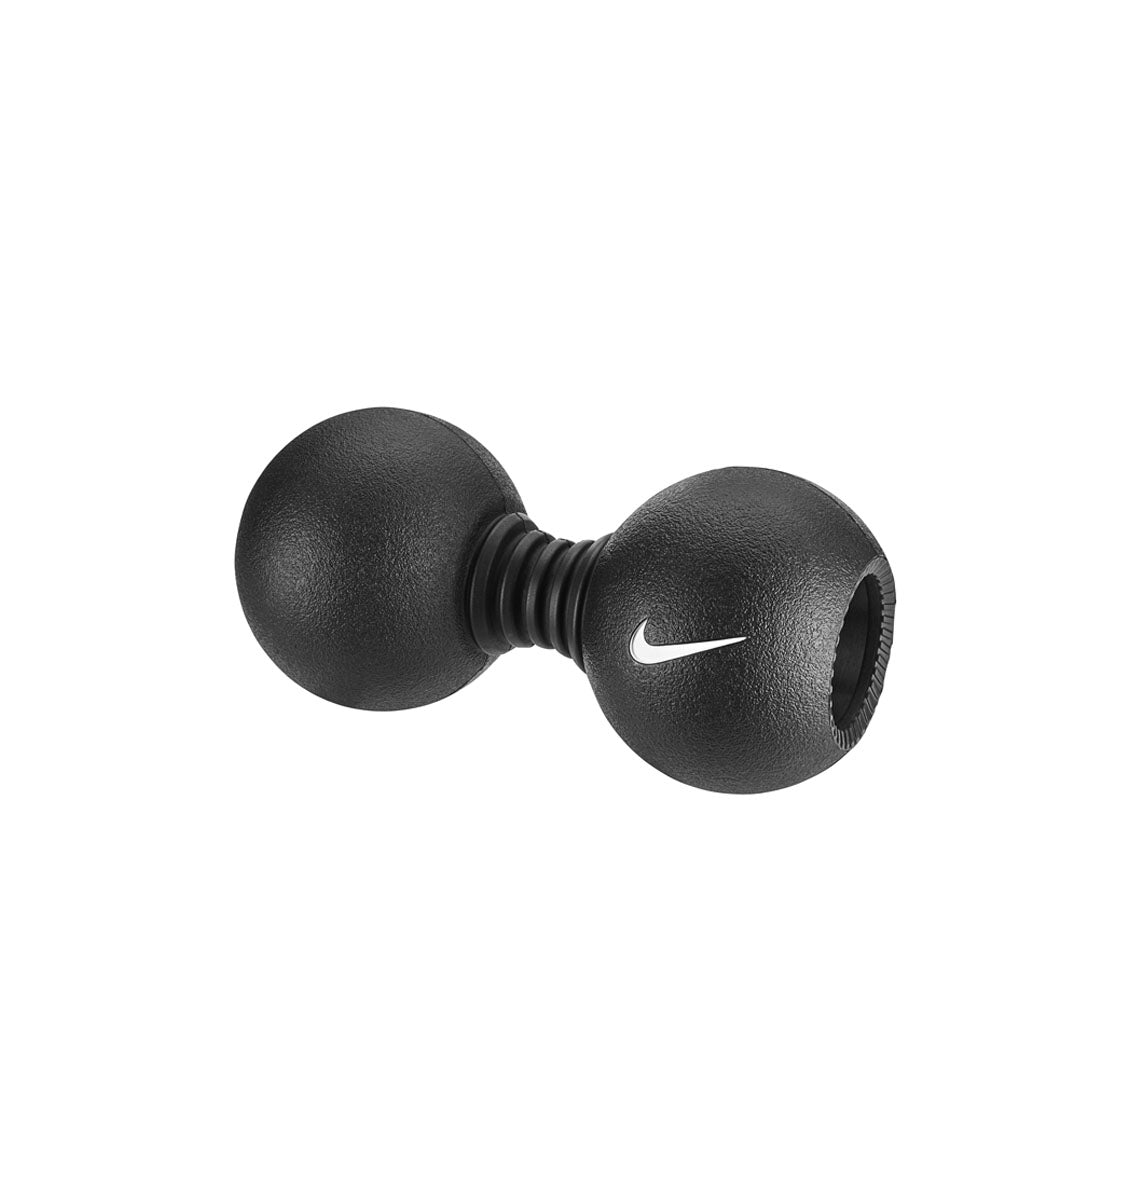 Nike Recovery Dual Roller Massage Ball - Black/White - 1